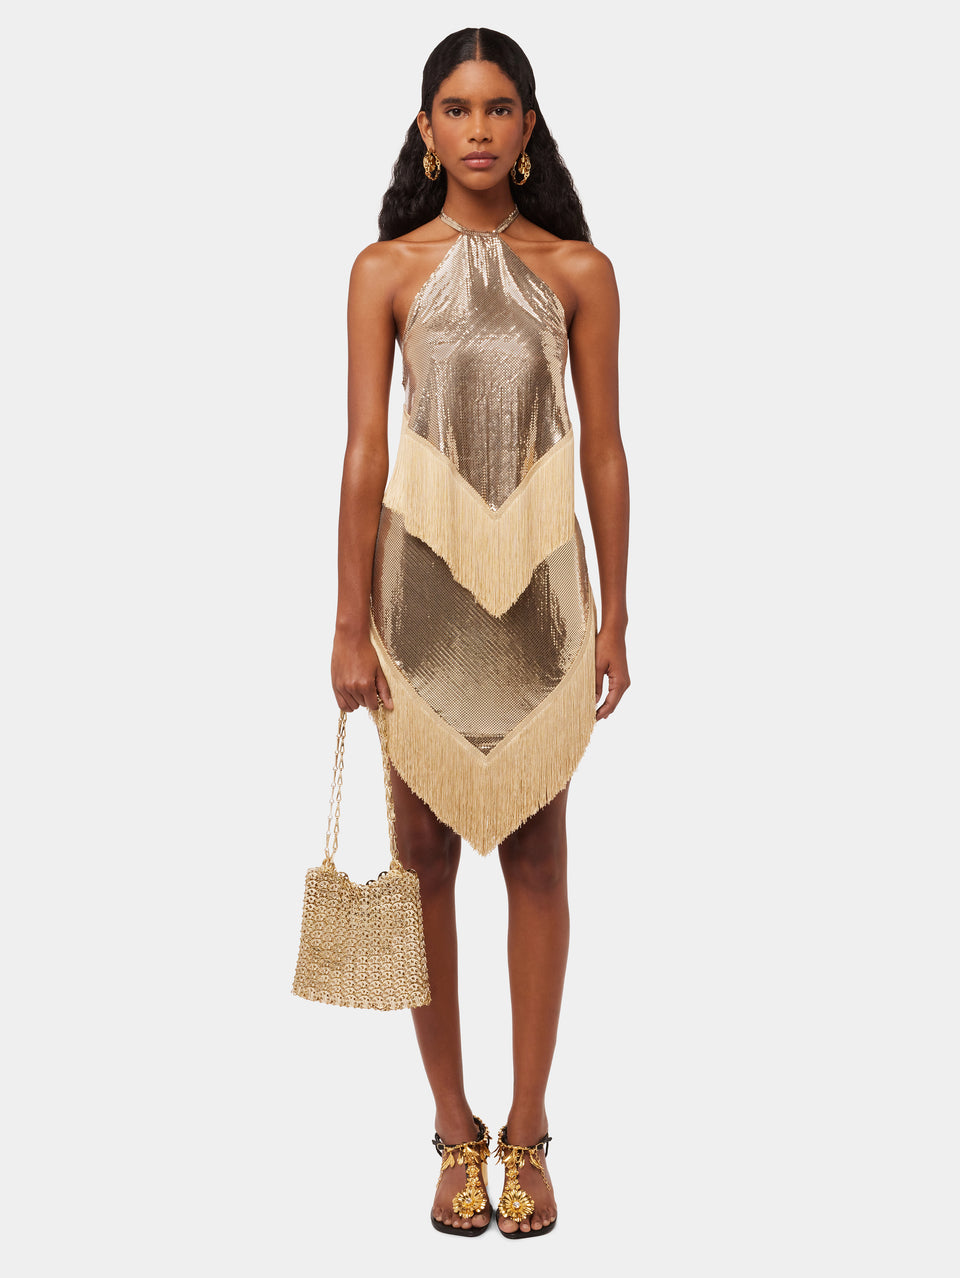 MESH SKIRT PAREO WITH FRINGES DETAILS